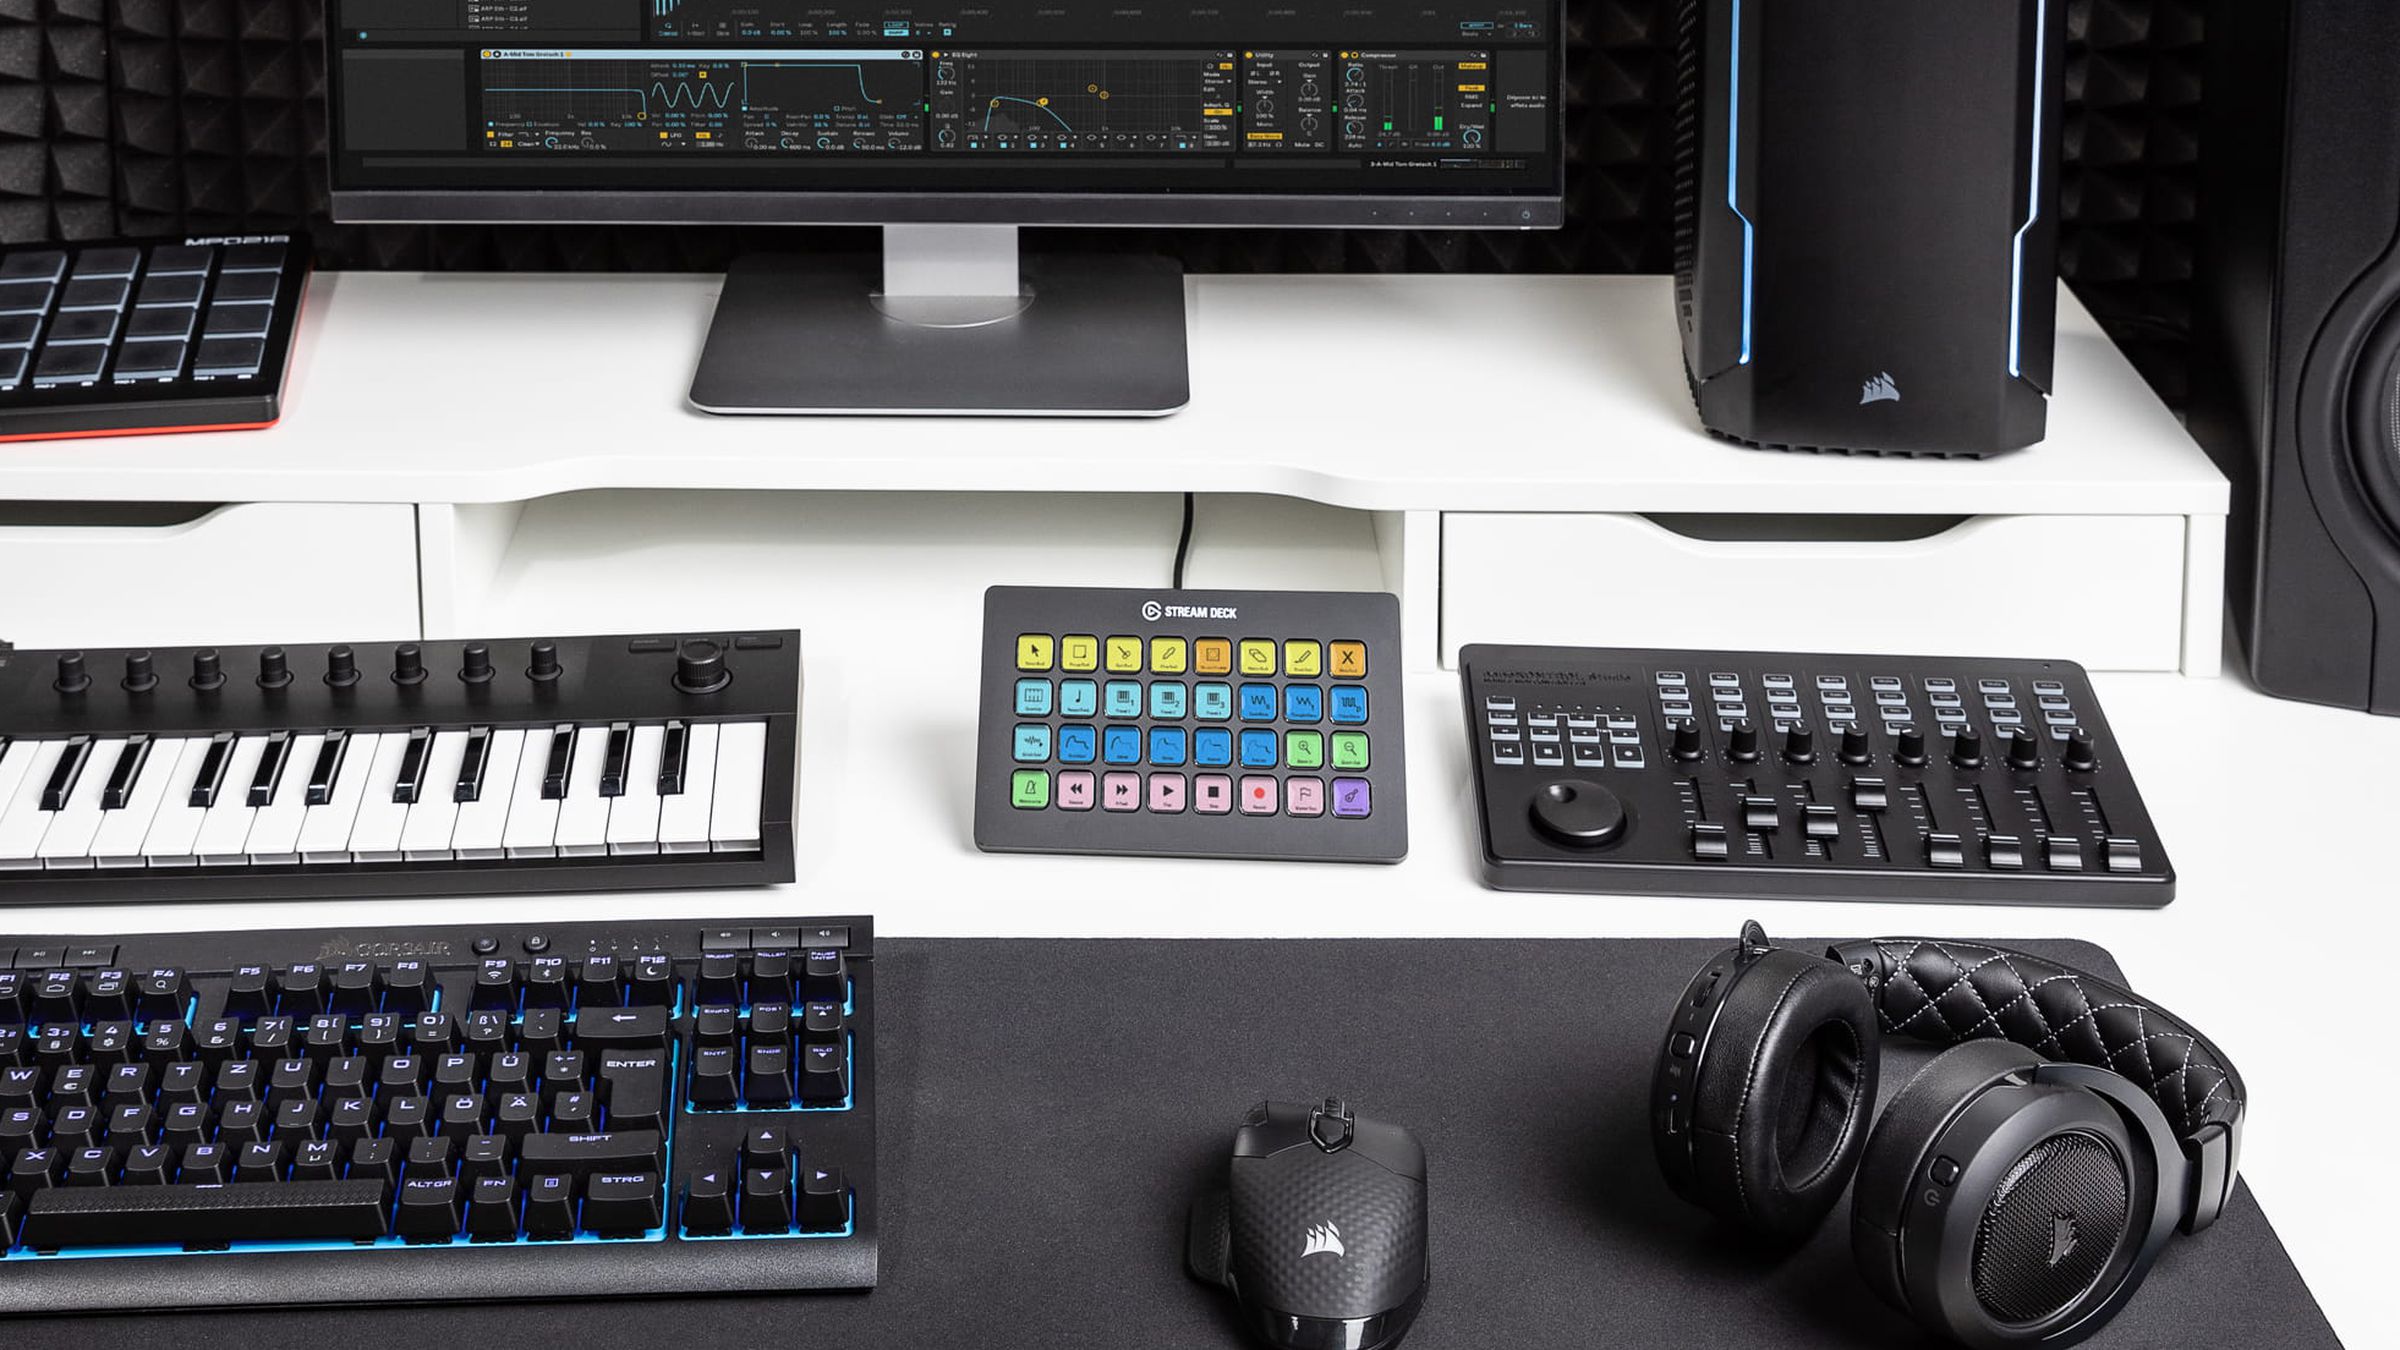 The Stream Deck XL in all its 32-key glory